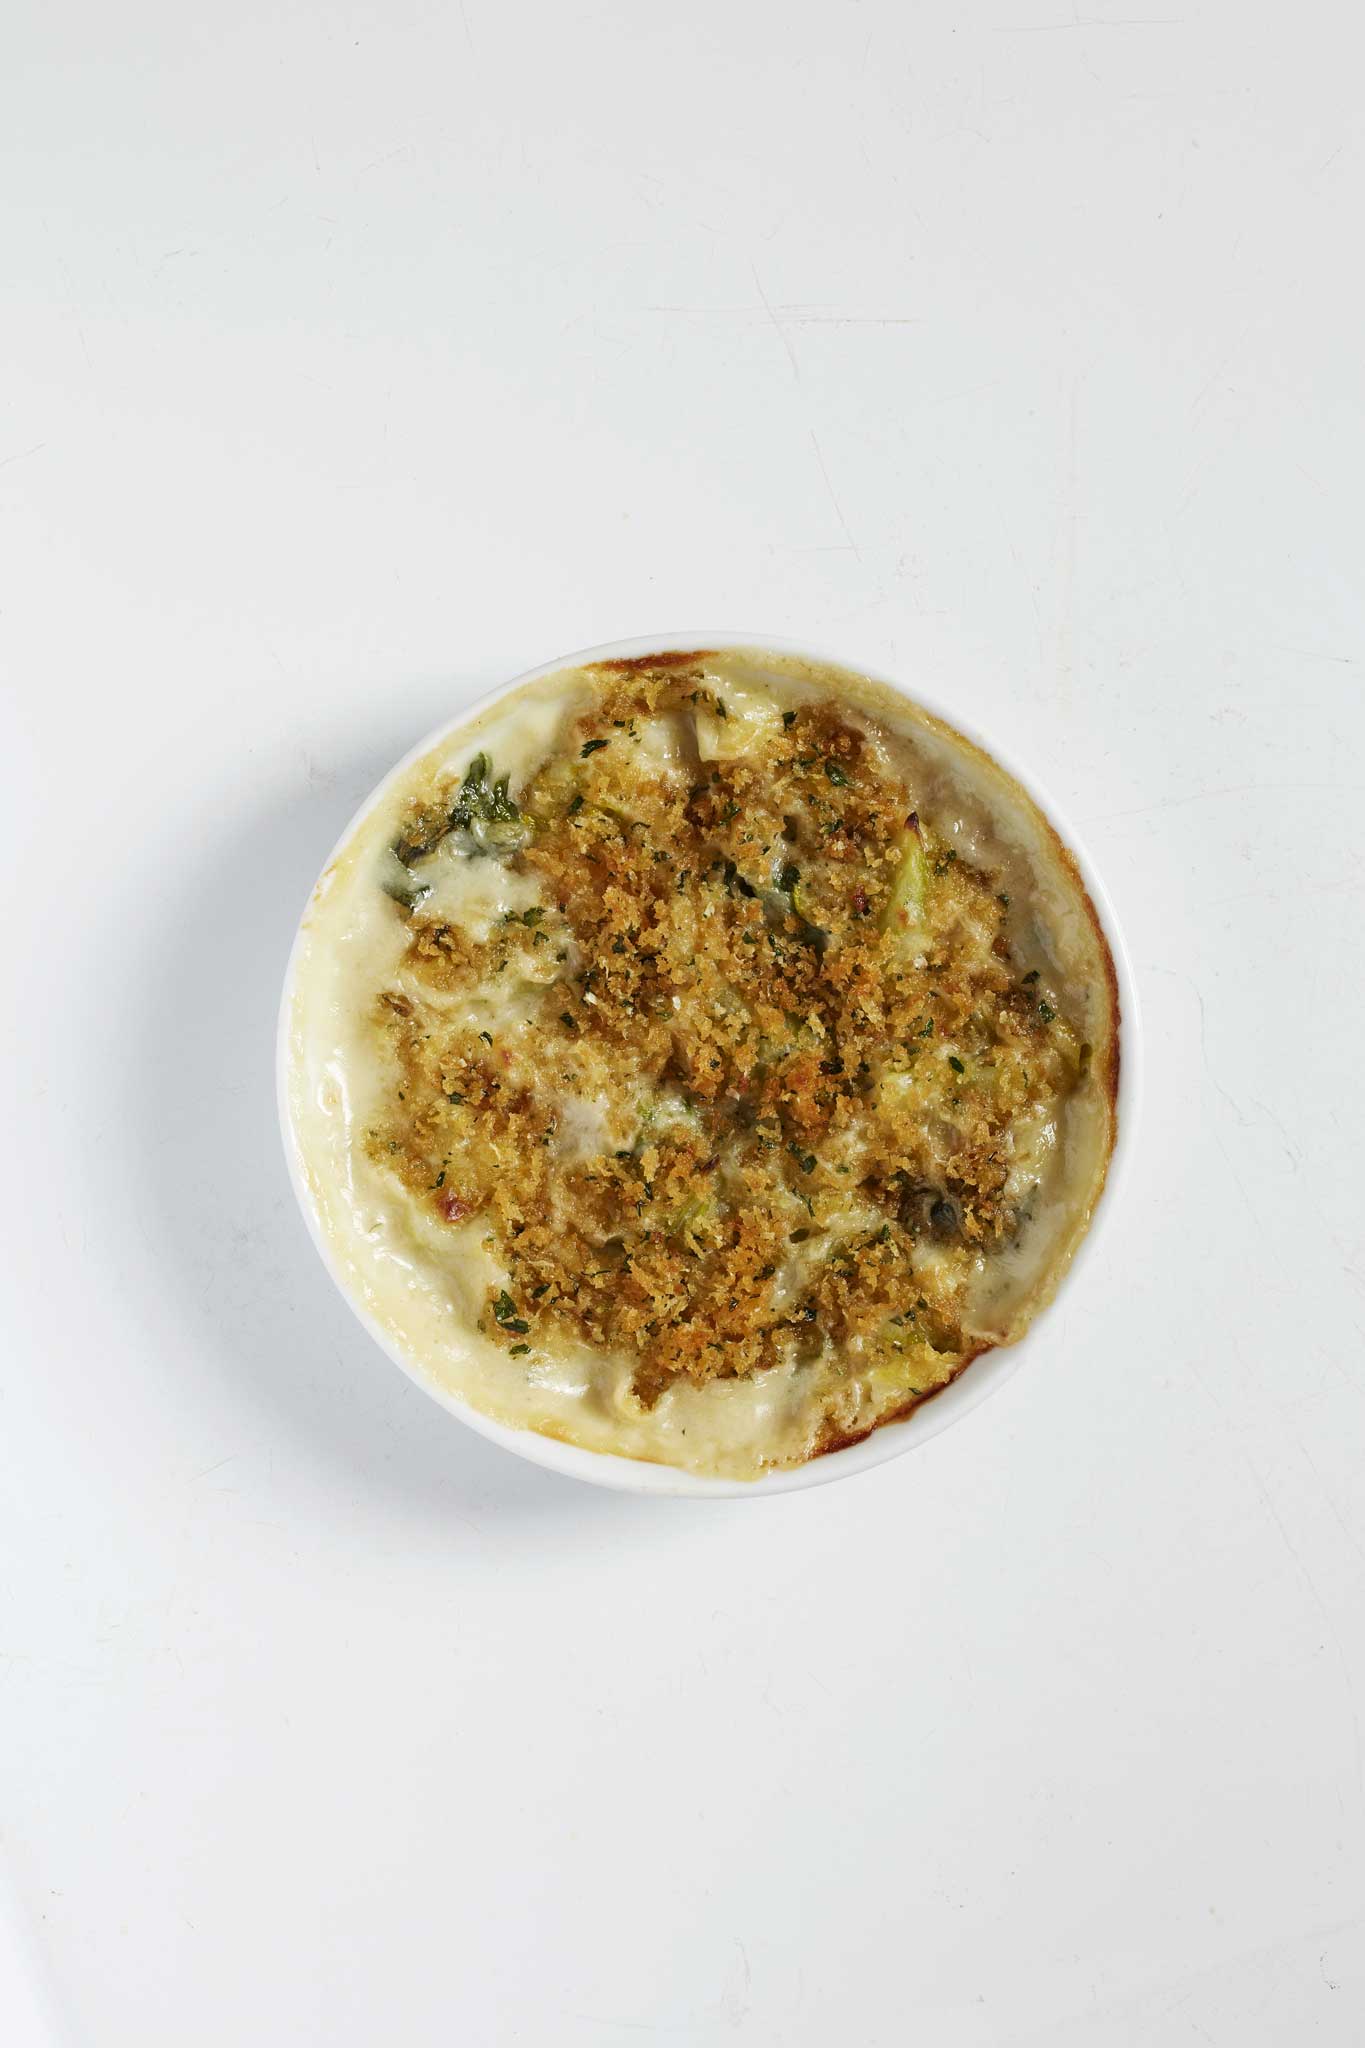 Celery gratin can be served with meat or fish and even as a vegetarian main course